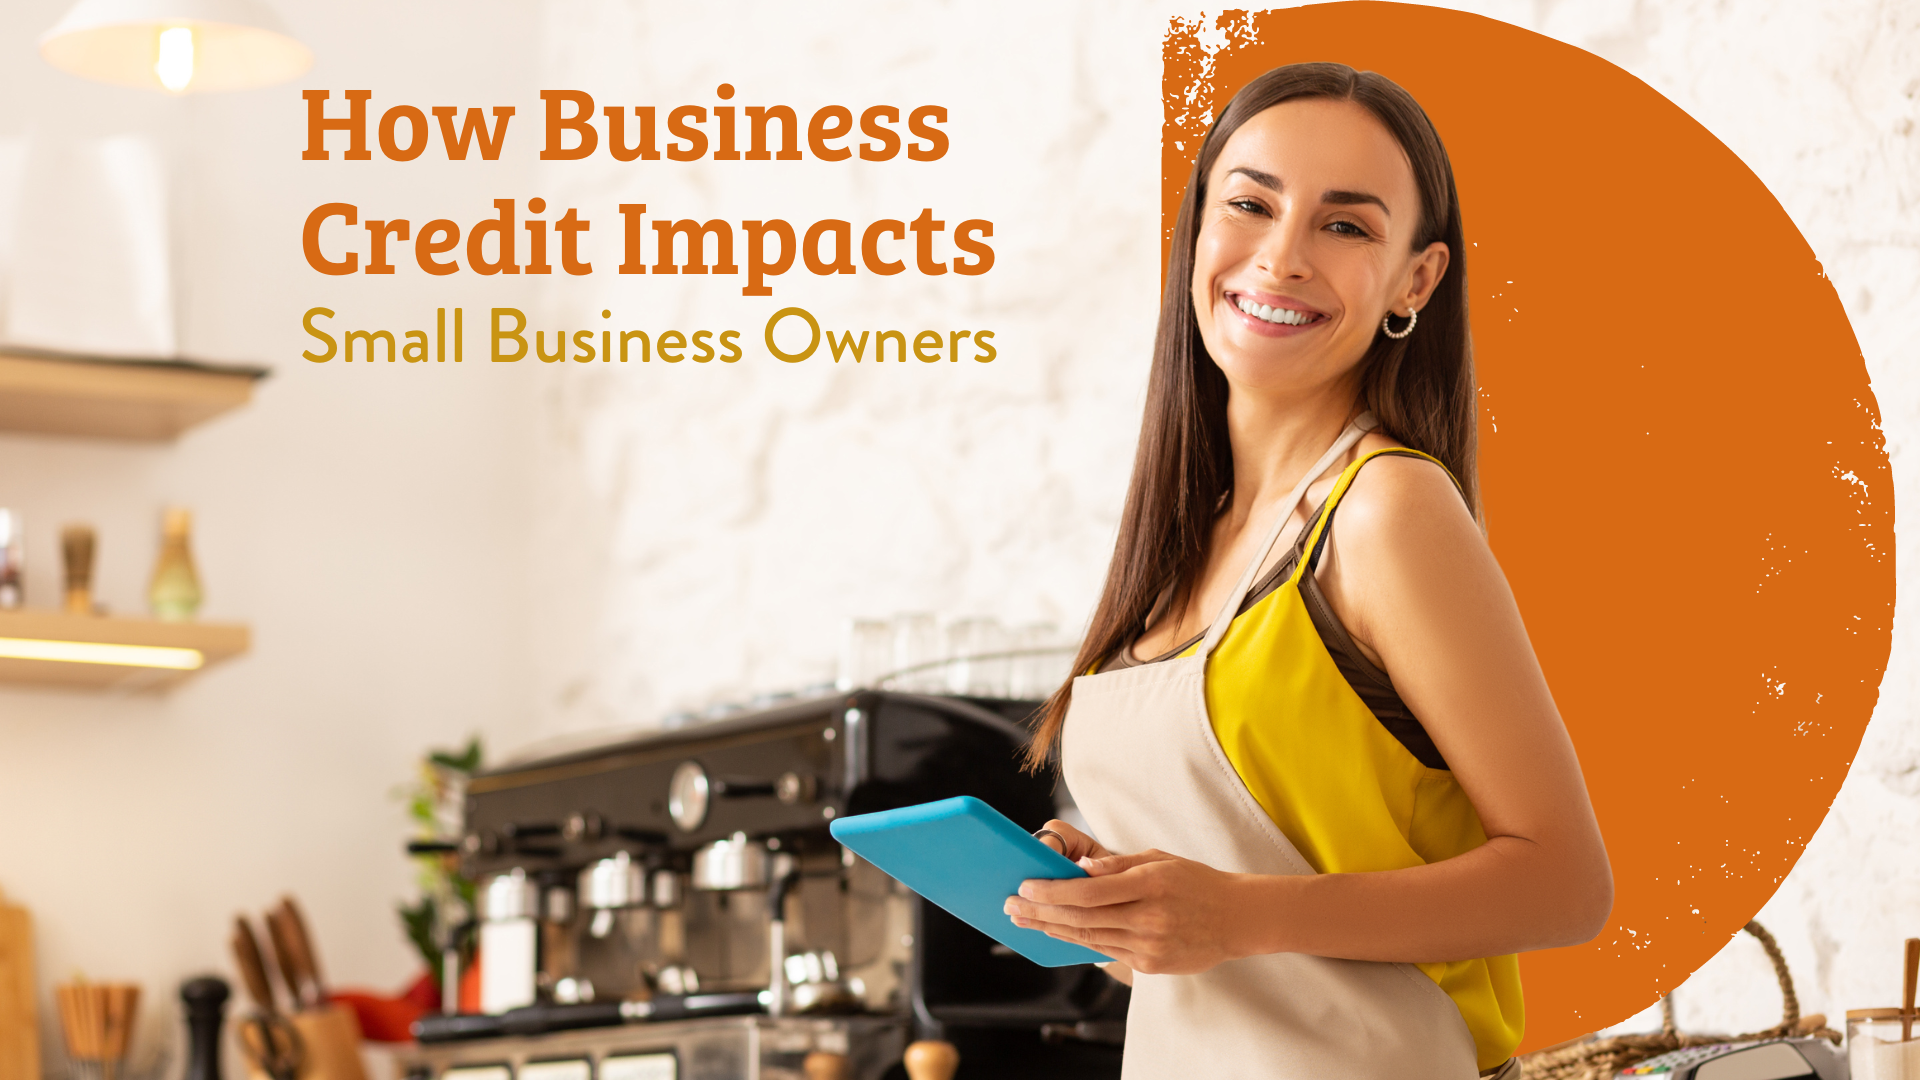 How Business Credit Impacts Small Business Owners